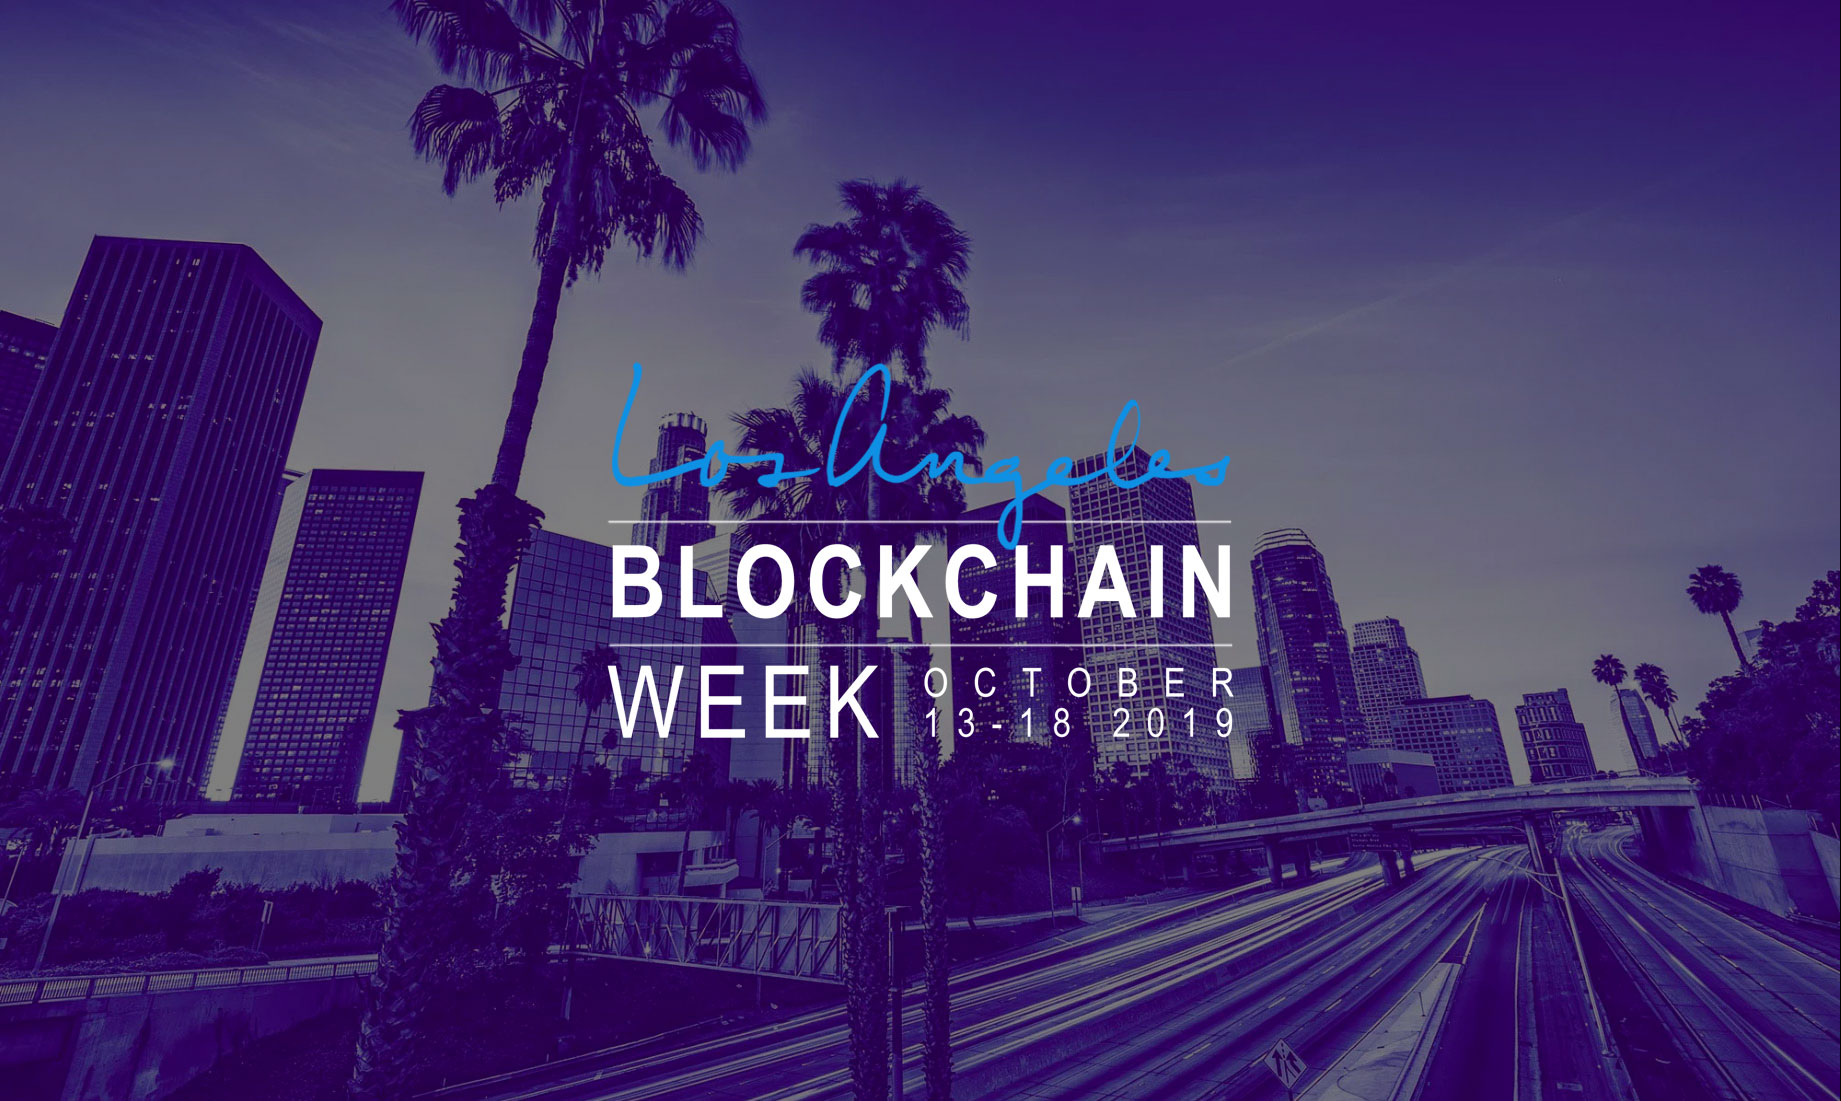 TR LA Blockchain Week Set to Takeover Los Angeles After Blockchain’s Biggest Summer To-Date and EAK is a Media partner!